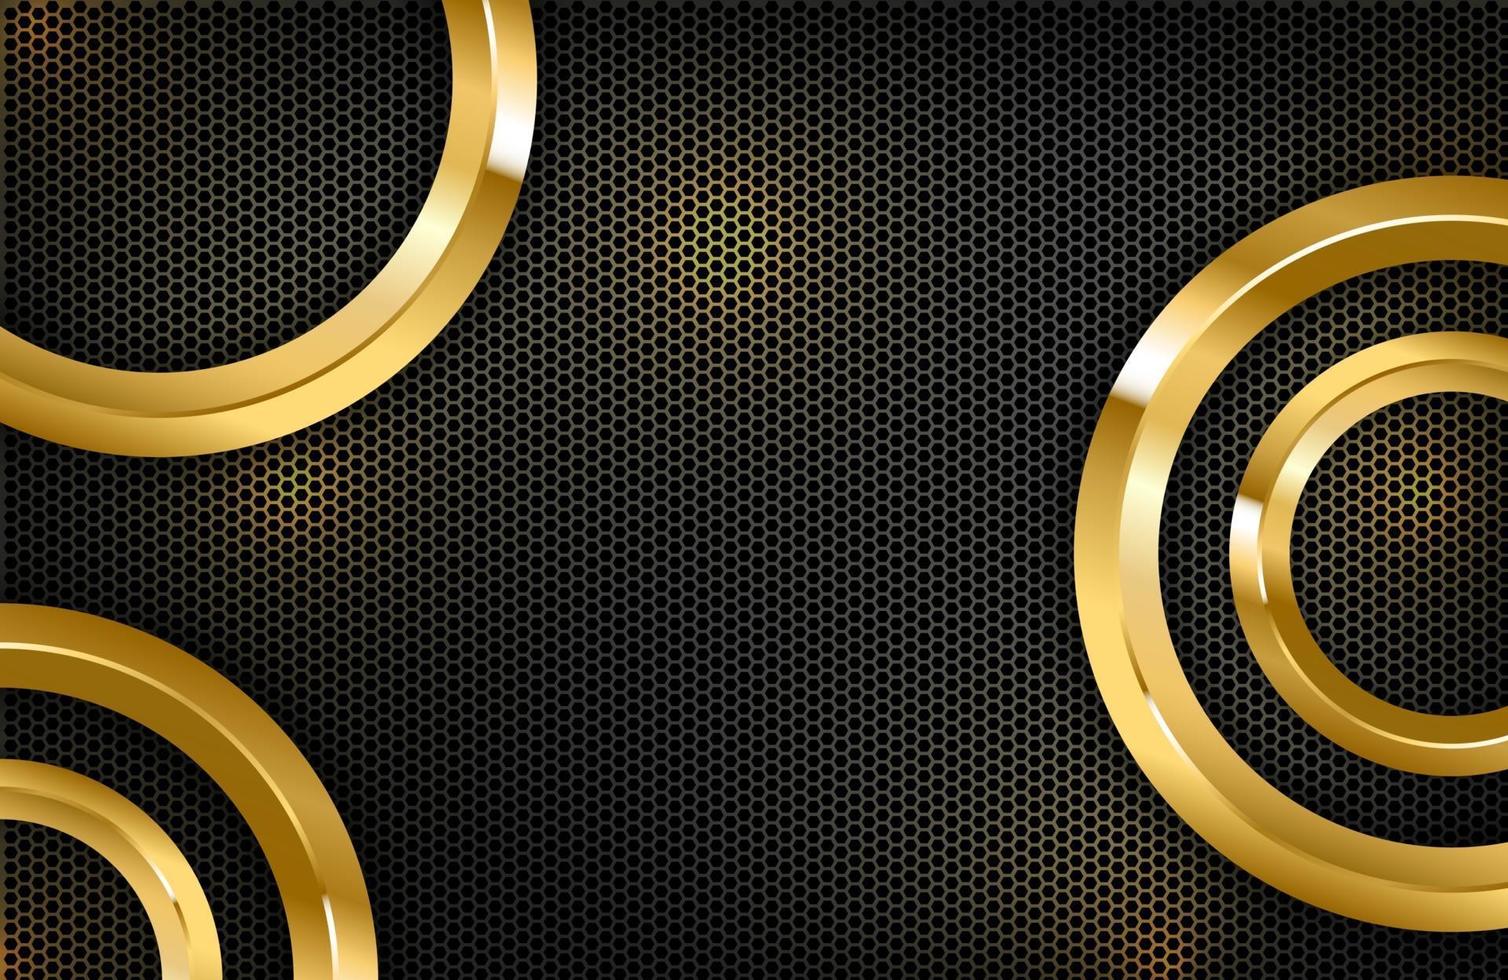 Luxury elegant background with shiny gold circle element on dark black carbon surface vector